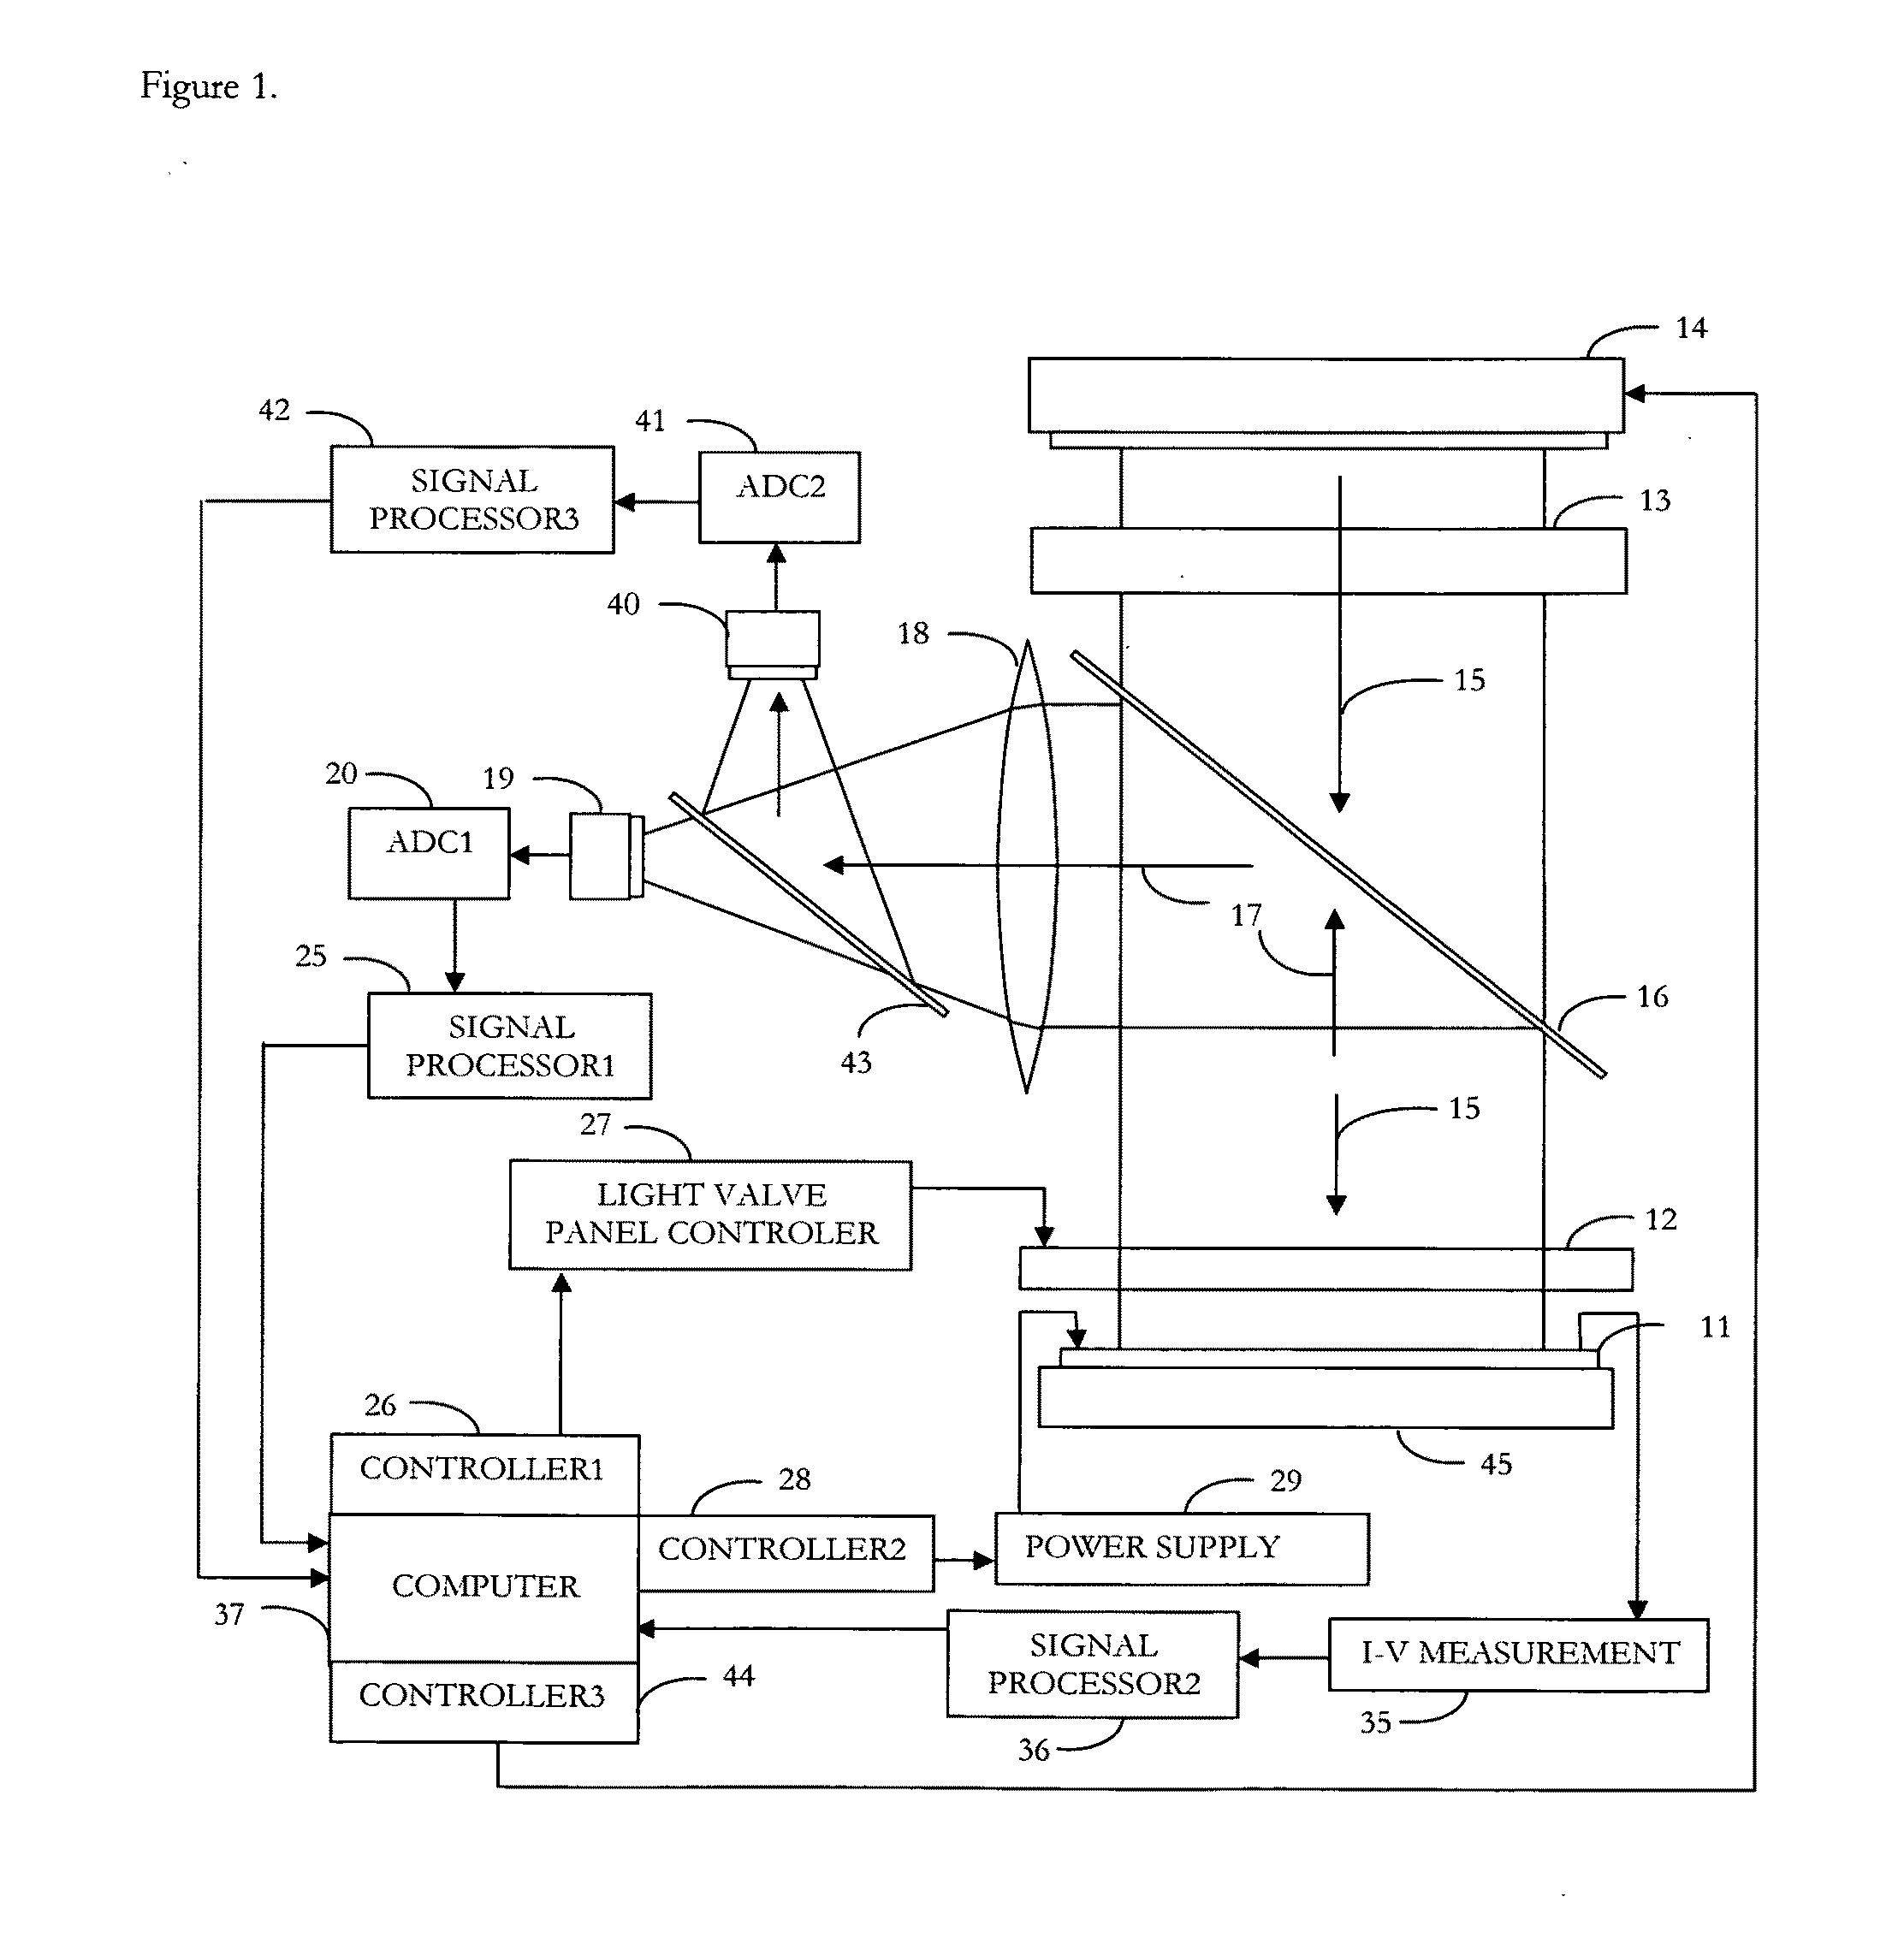 System and method for characterizing solar cell conversion performance and detecting defects in a solar cell